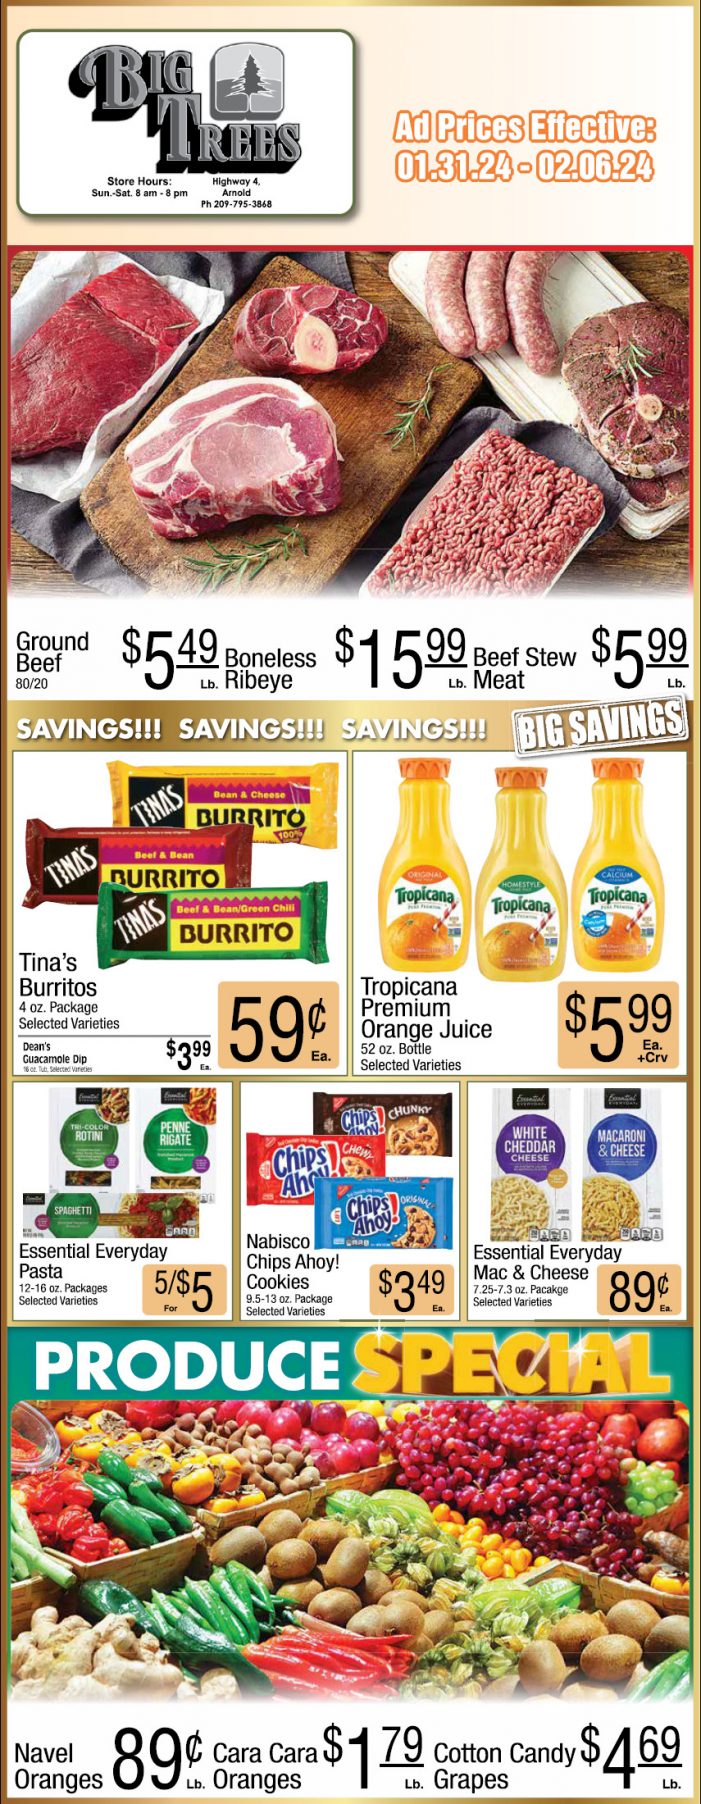 Big Trees Market Weekly Ad, Grocery, Produce, Meat & Deli Specials Through February 6th! Shop Local & Save!